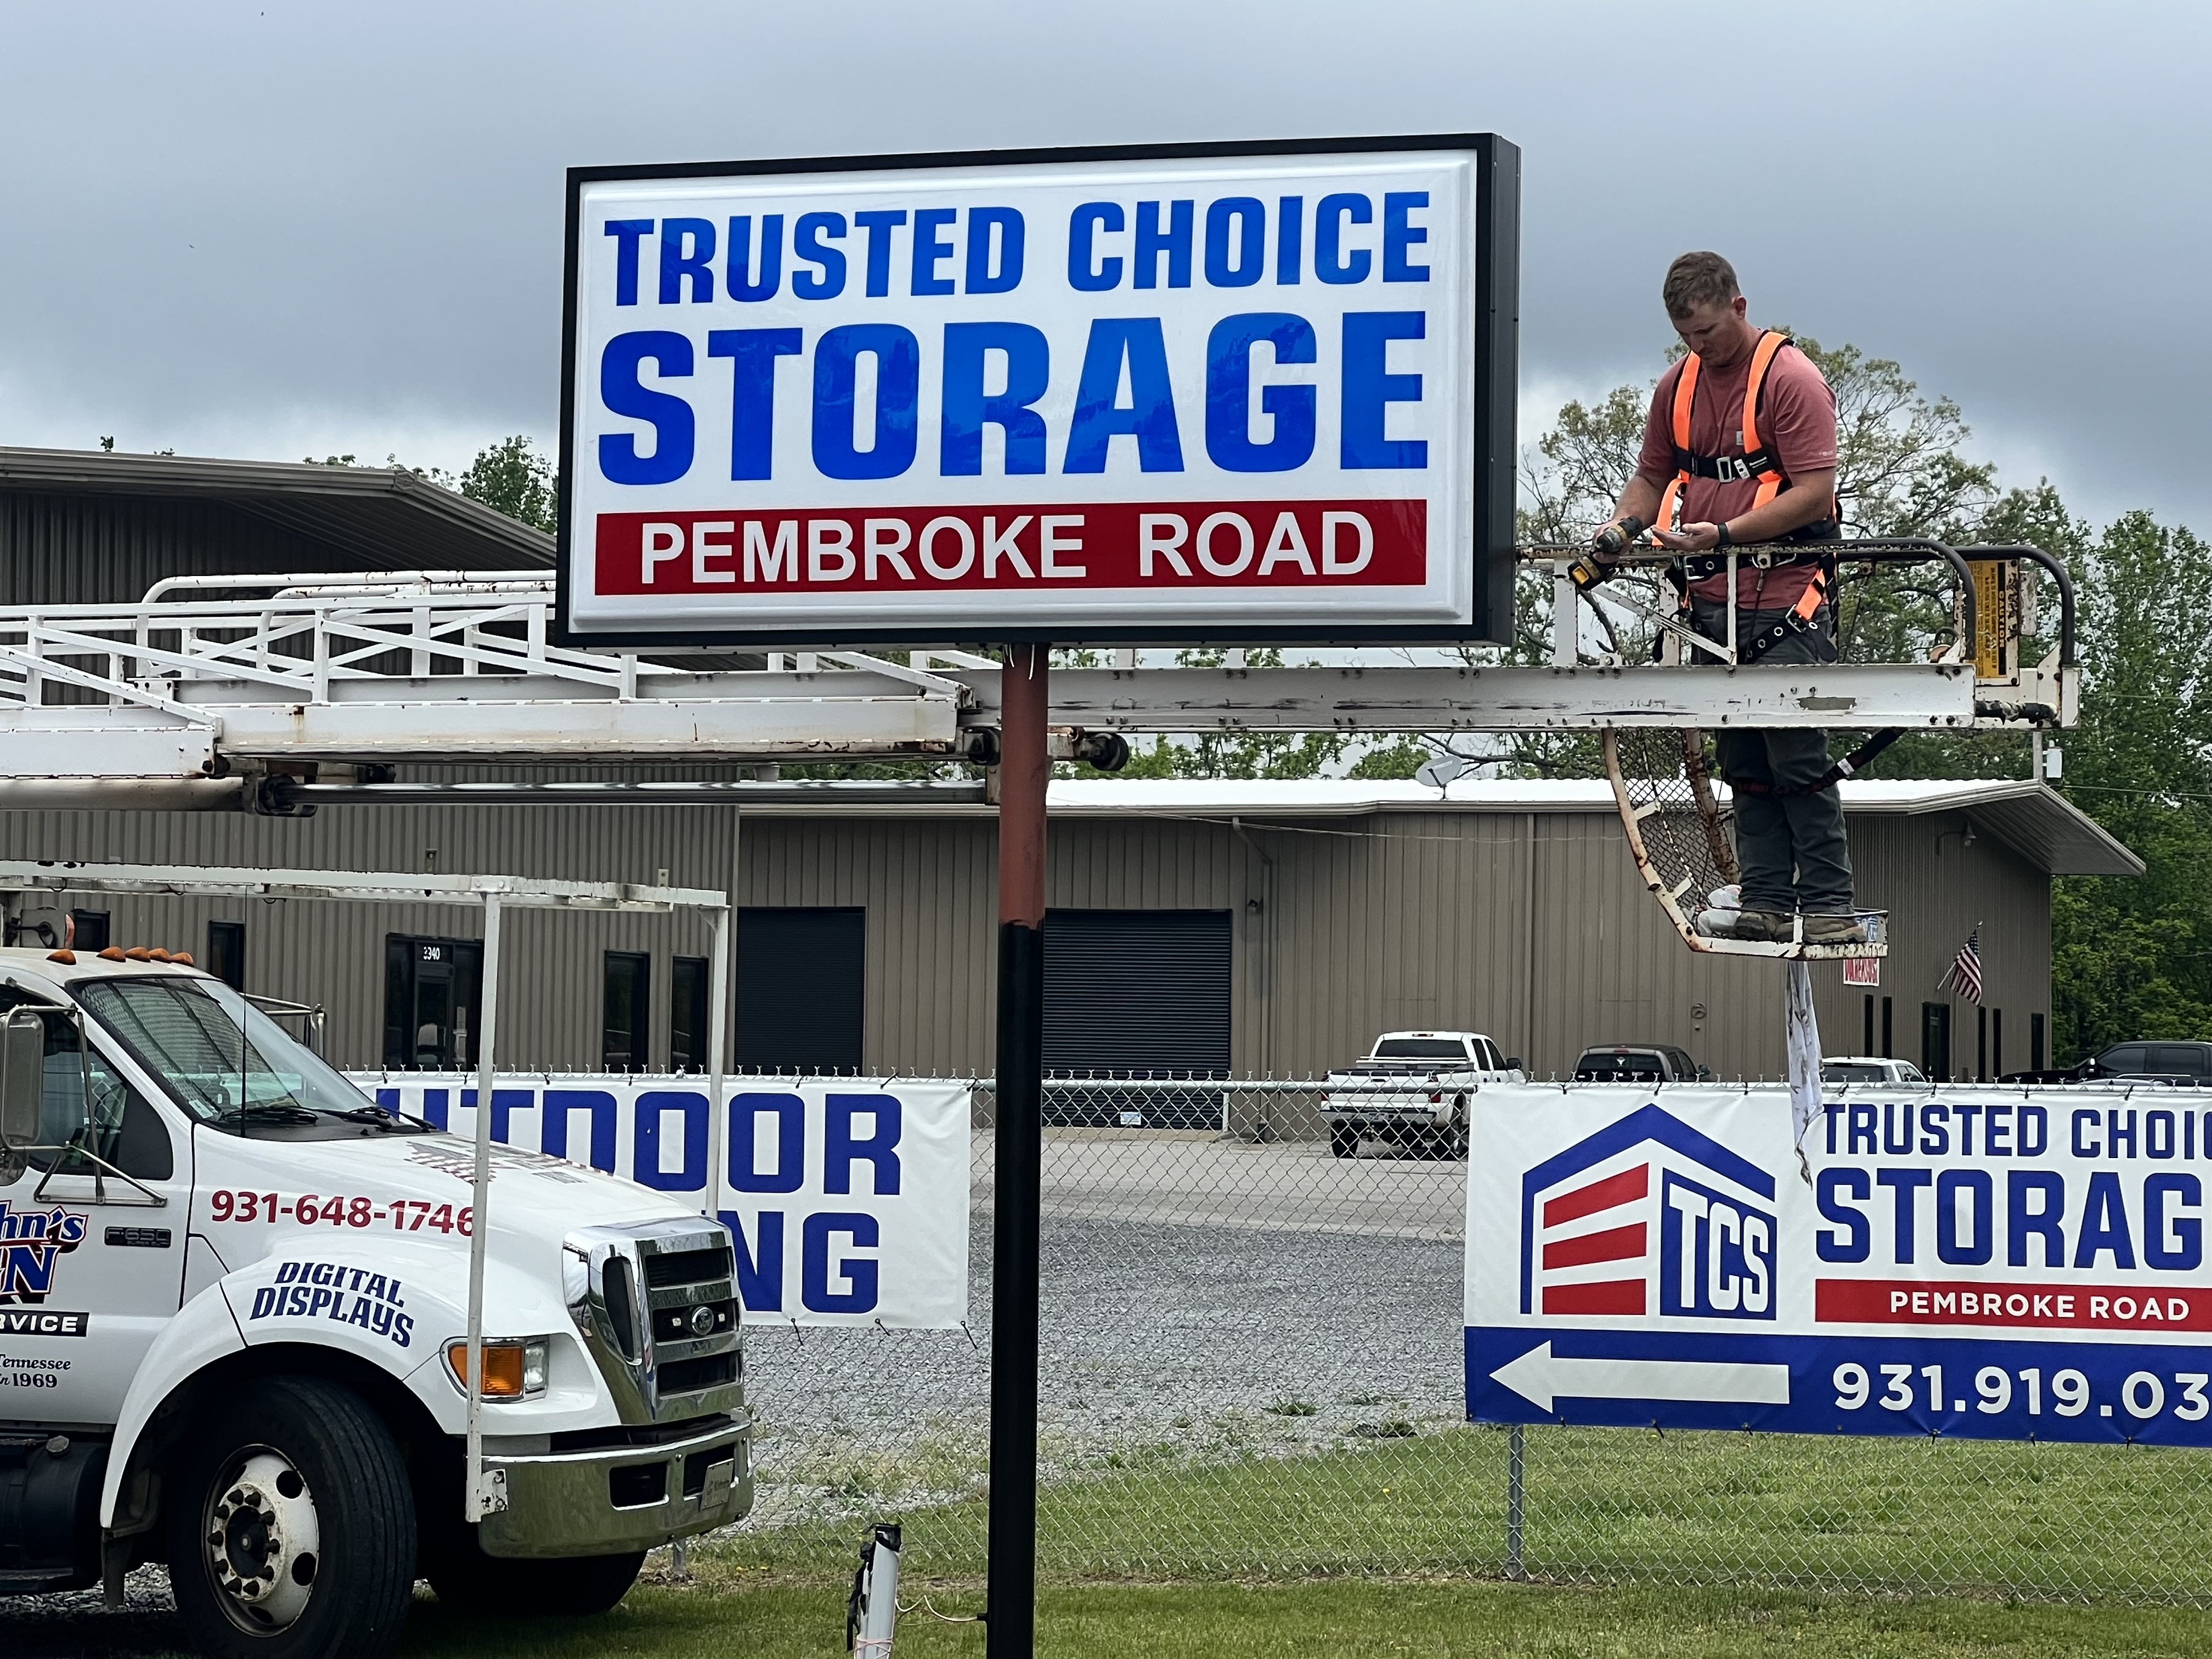 Trusted Choice Storage - Pembroke Rd Now Open